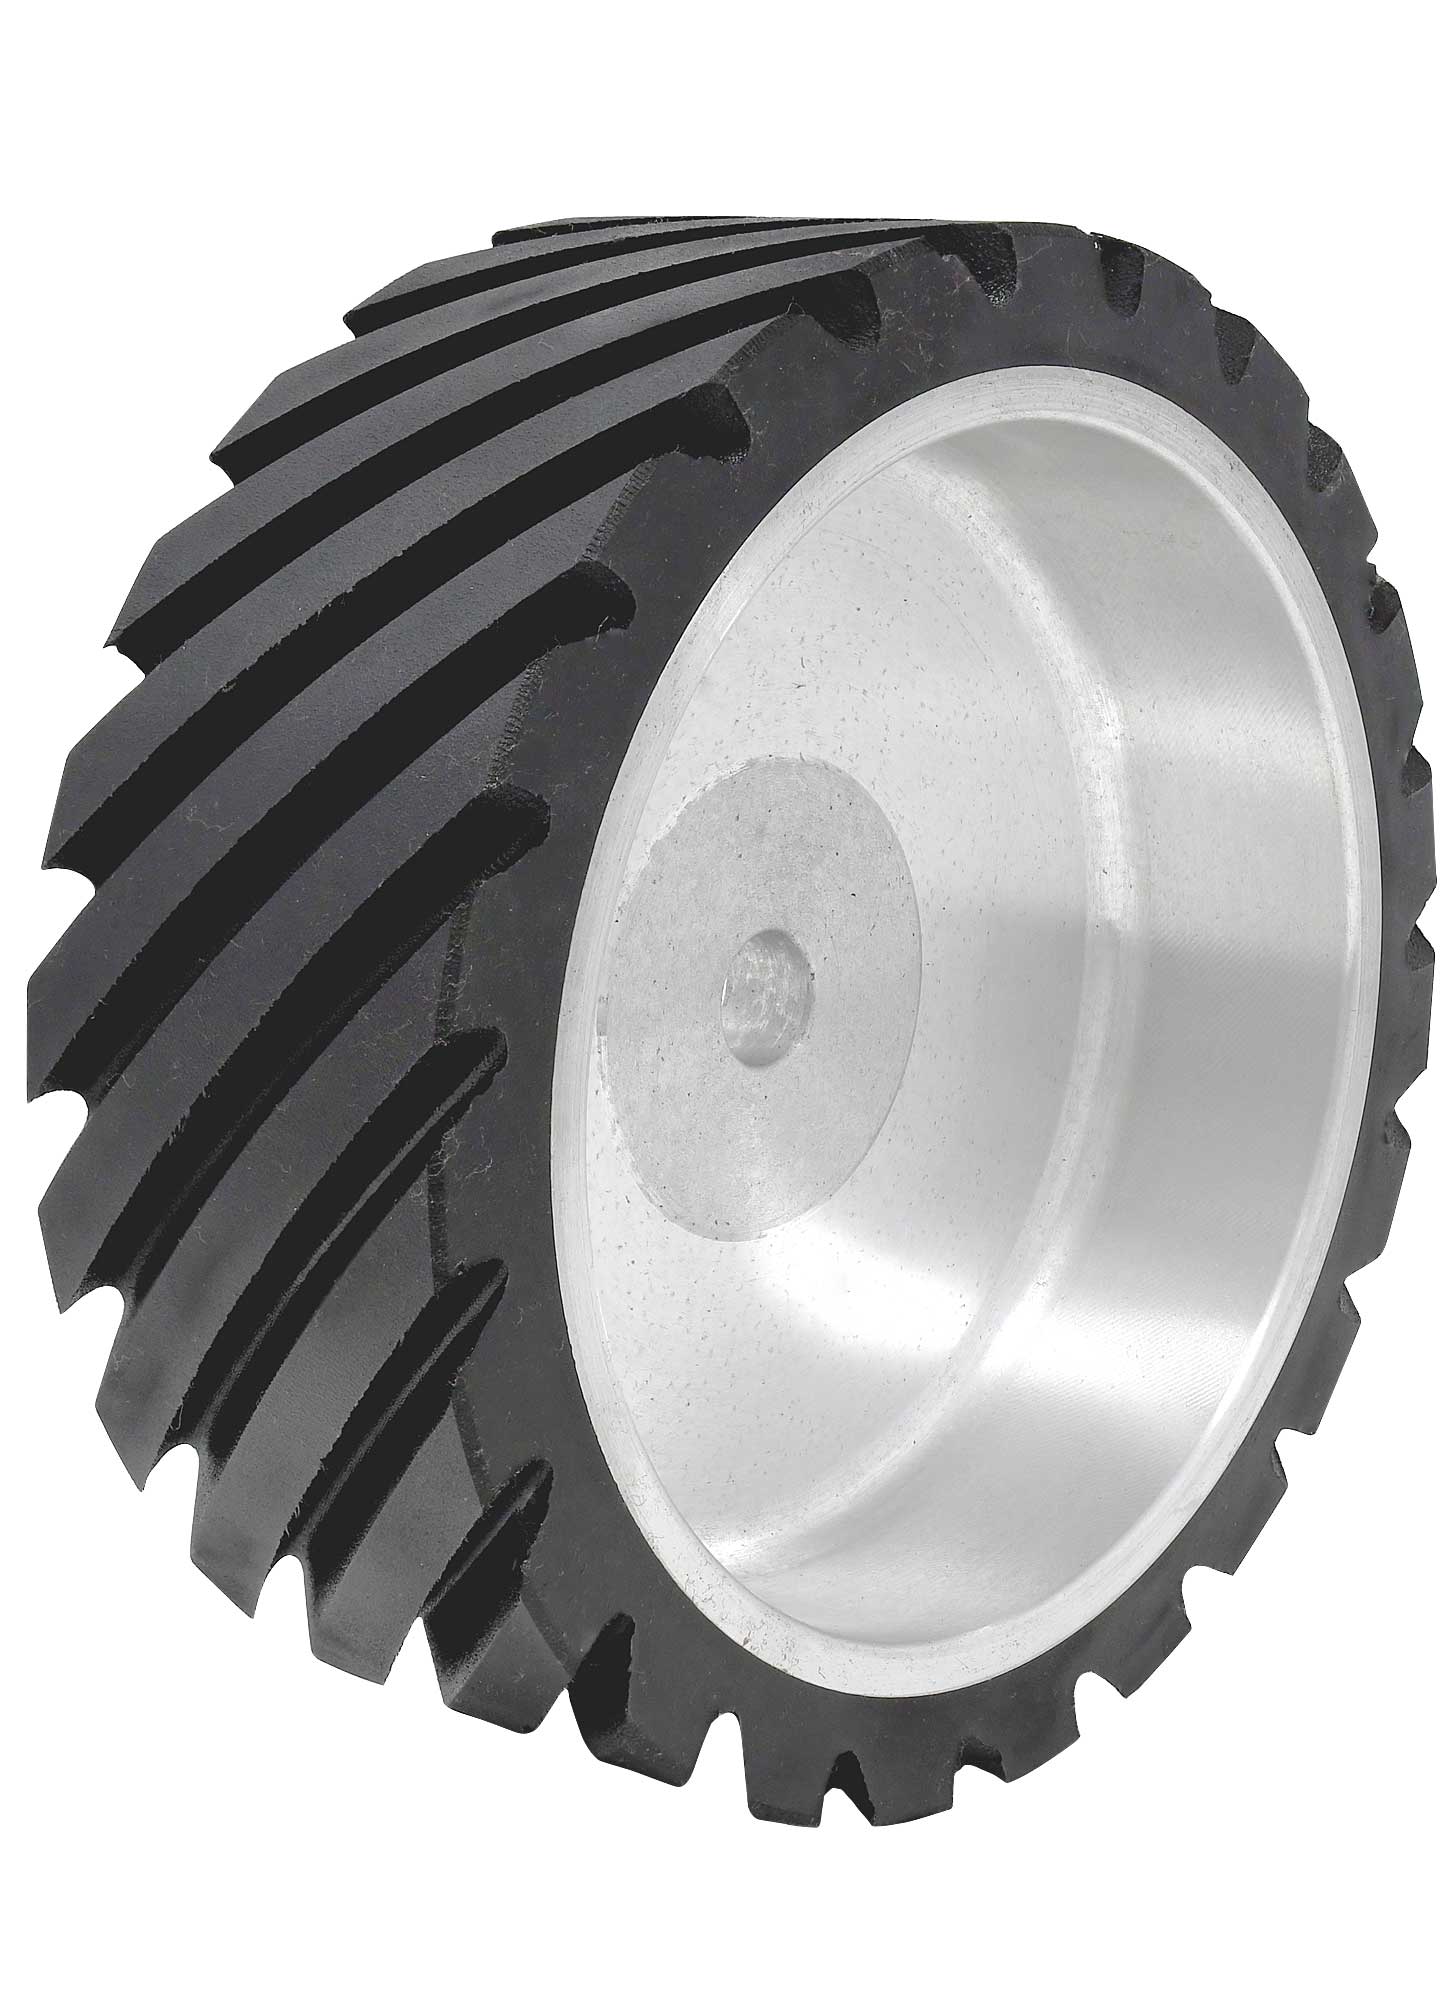 802-S-55 Serrated Contact Wheel, 7 x 2.5, 55 Duro